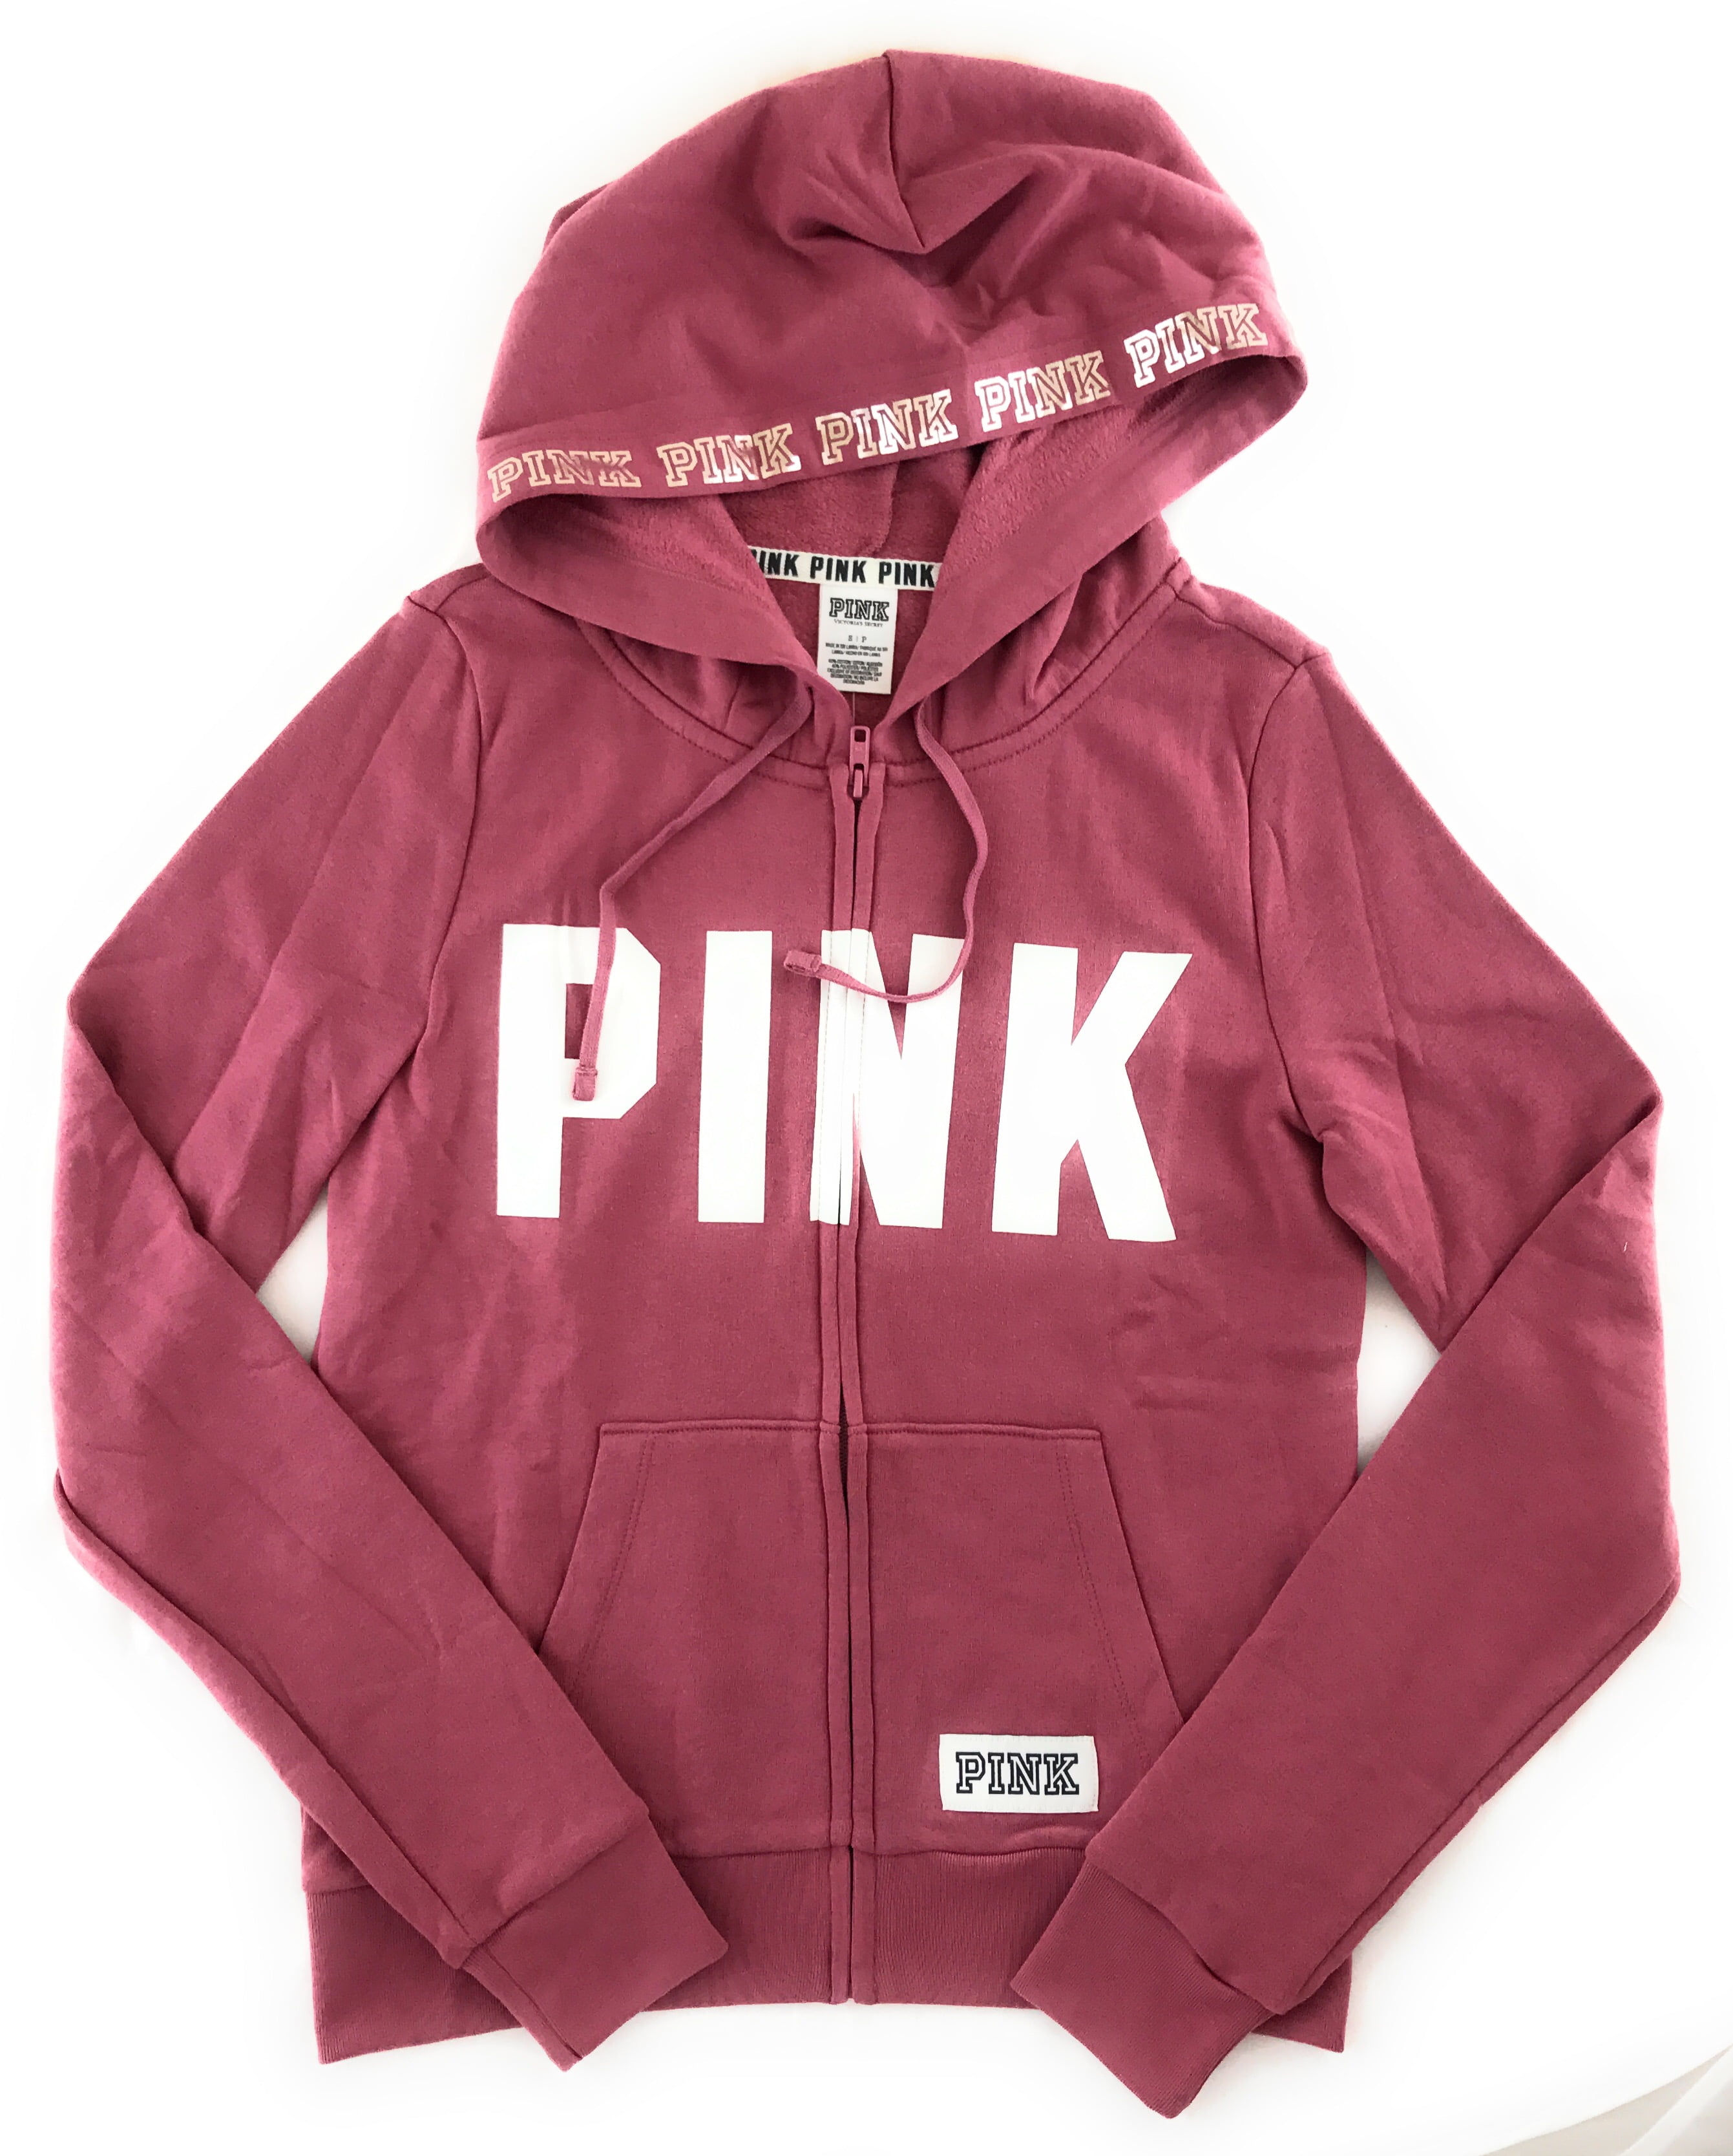 PINK - Victoria's Secret Victoria's Secret Pink Hot Pink Zip Up Jacket  Sweatshirt - $37 (26% Off Retail) New With Tags - From Nicole